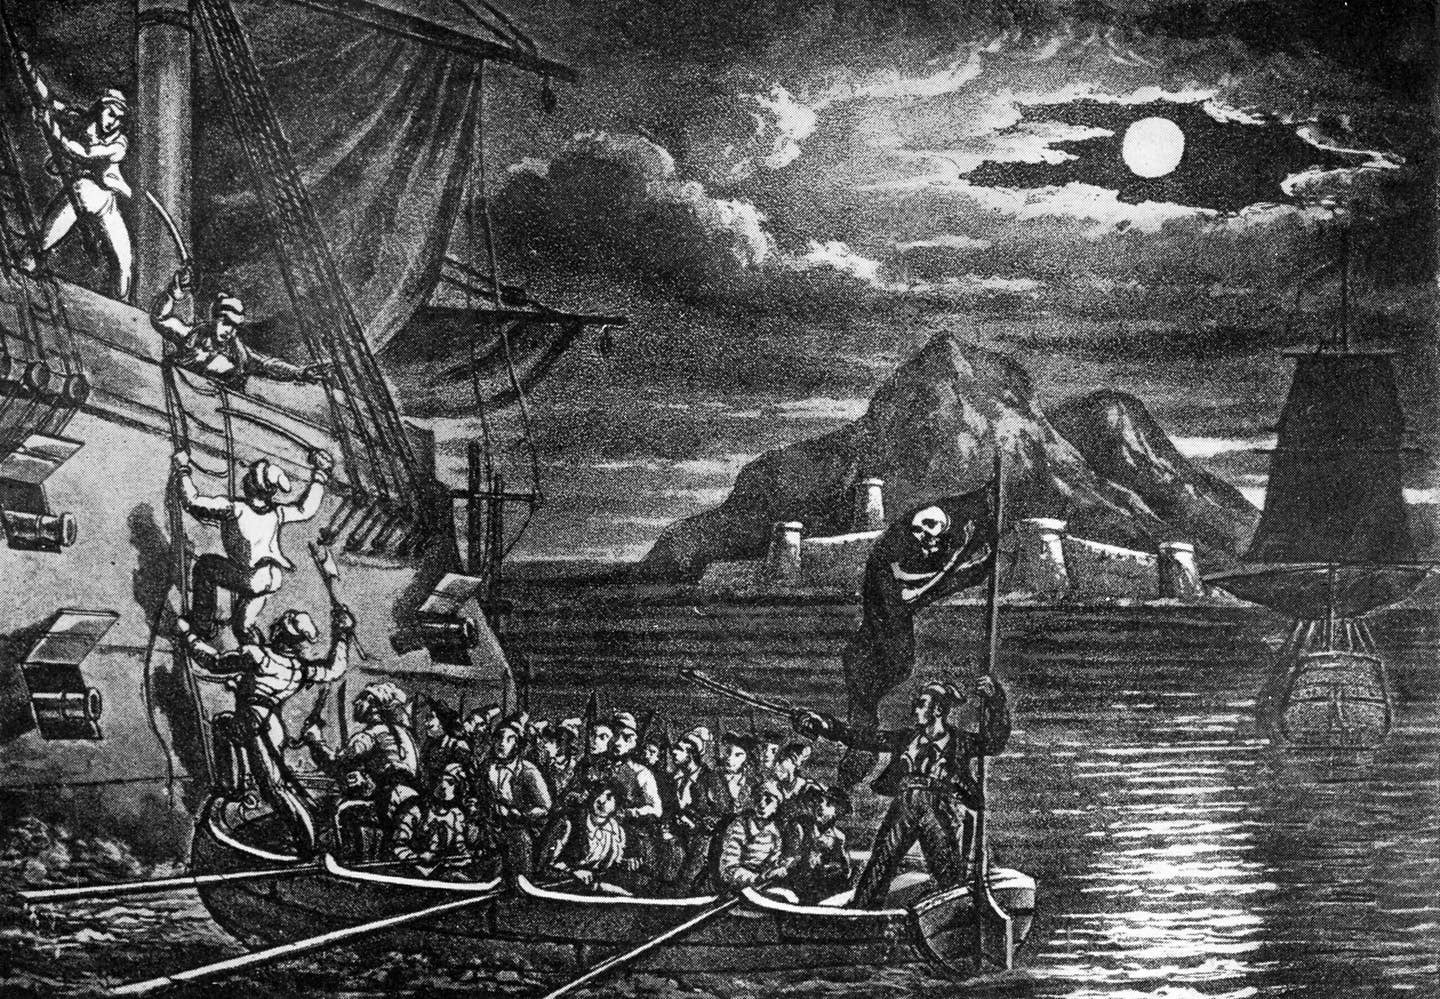 Pirates boarding a Spanish vessel in the West Indies, in an engraving from <em>The History and Lives of the Most Notorious Pirates</em>. <em>Photo by Culture Club/Getty Images</em>